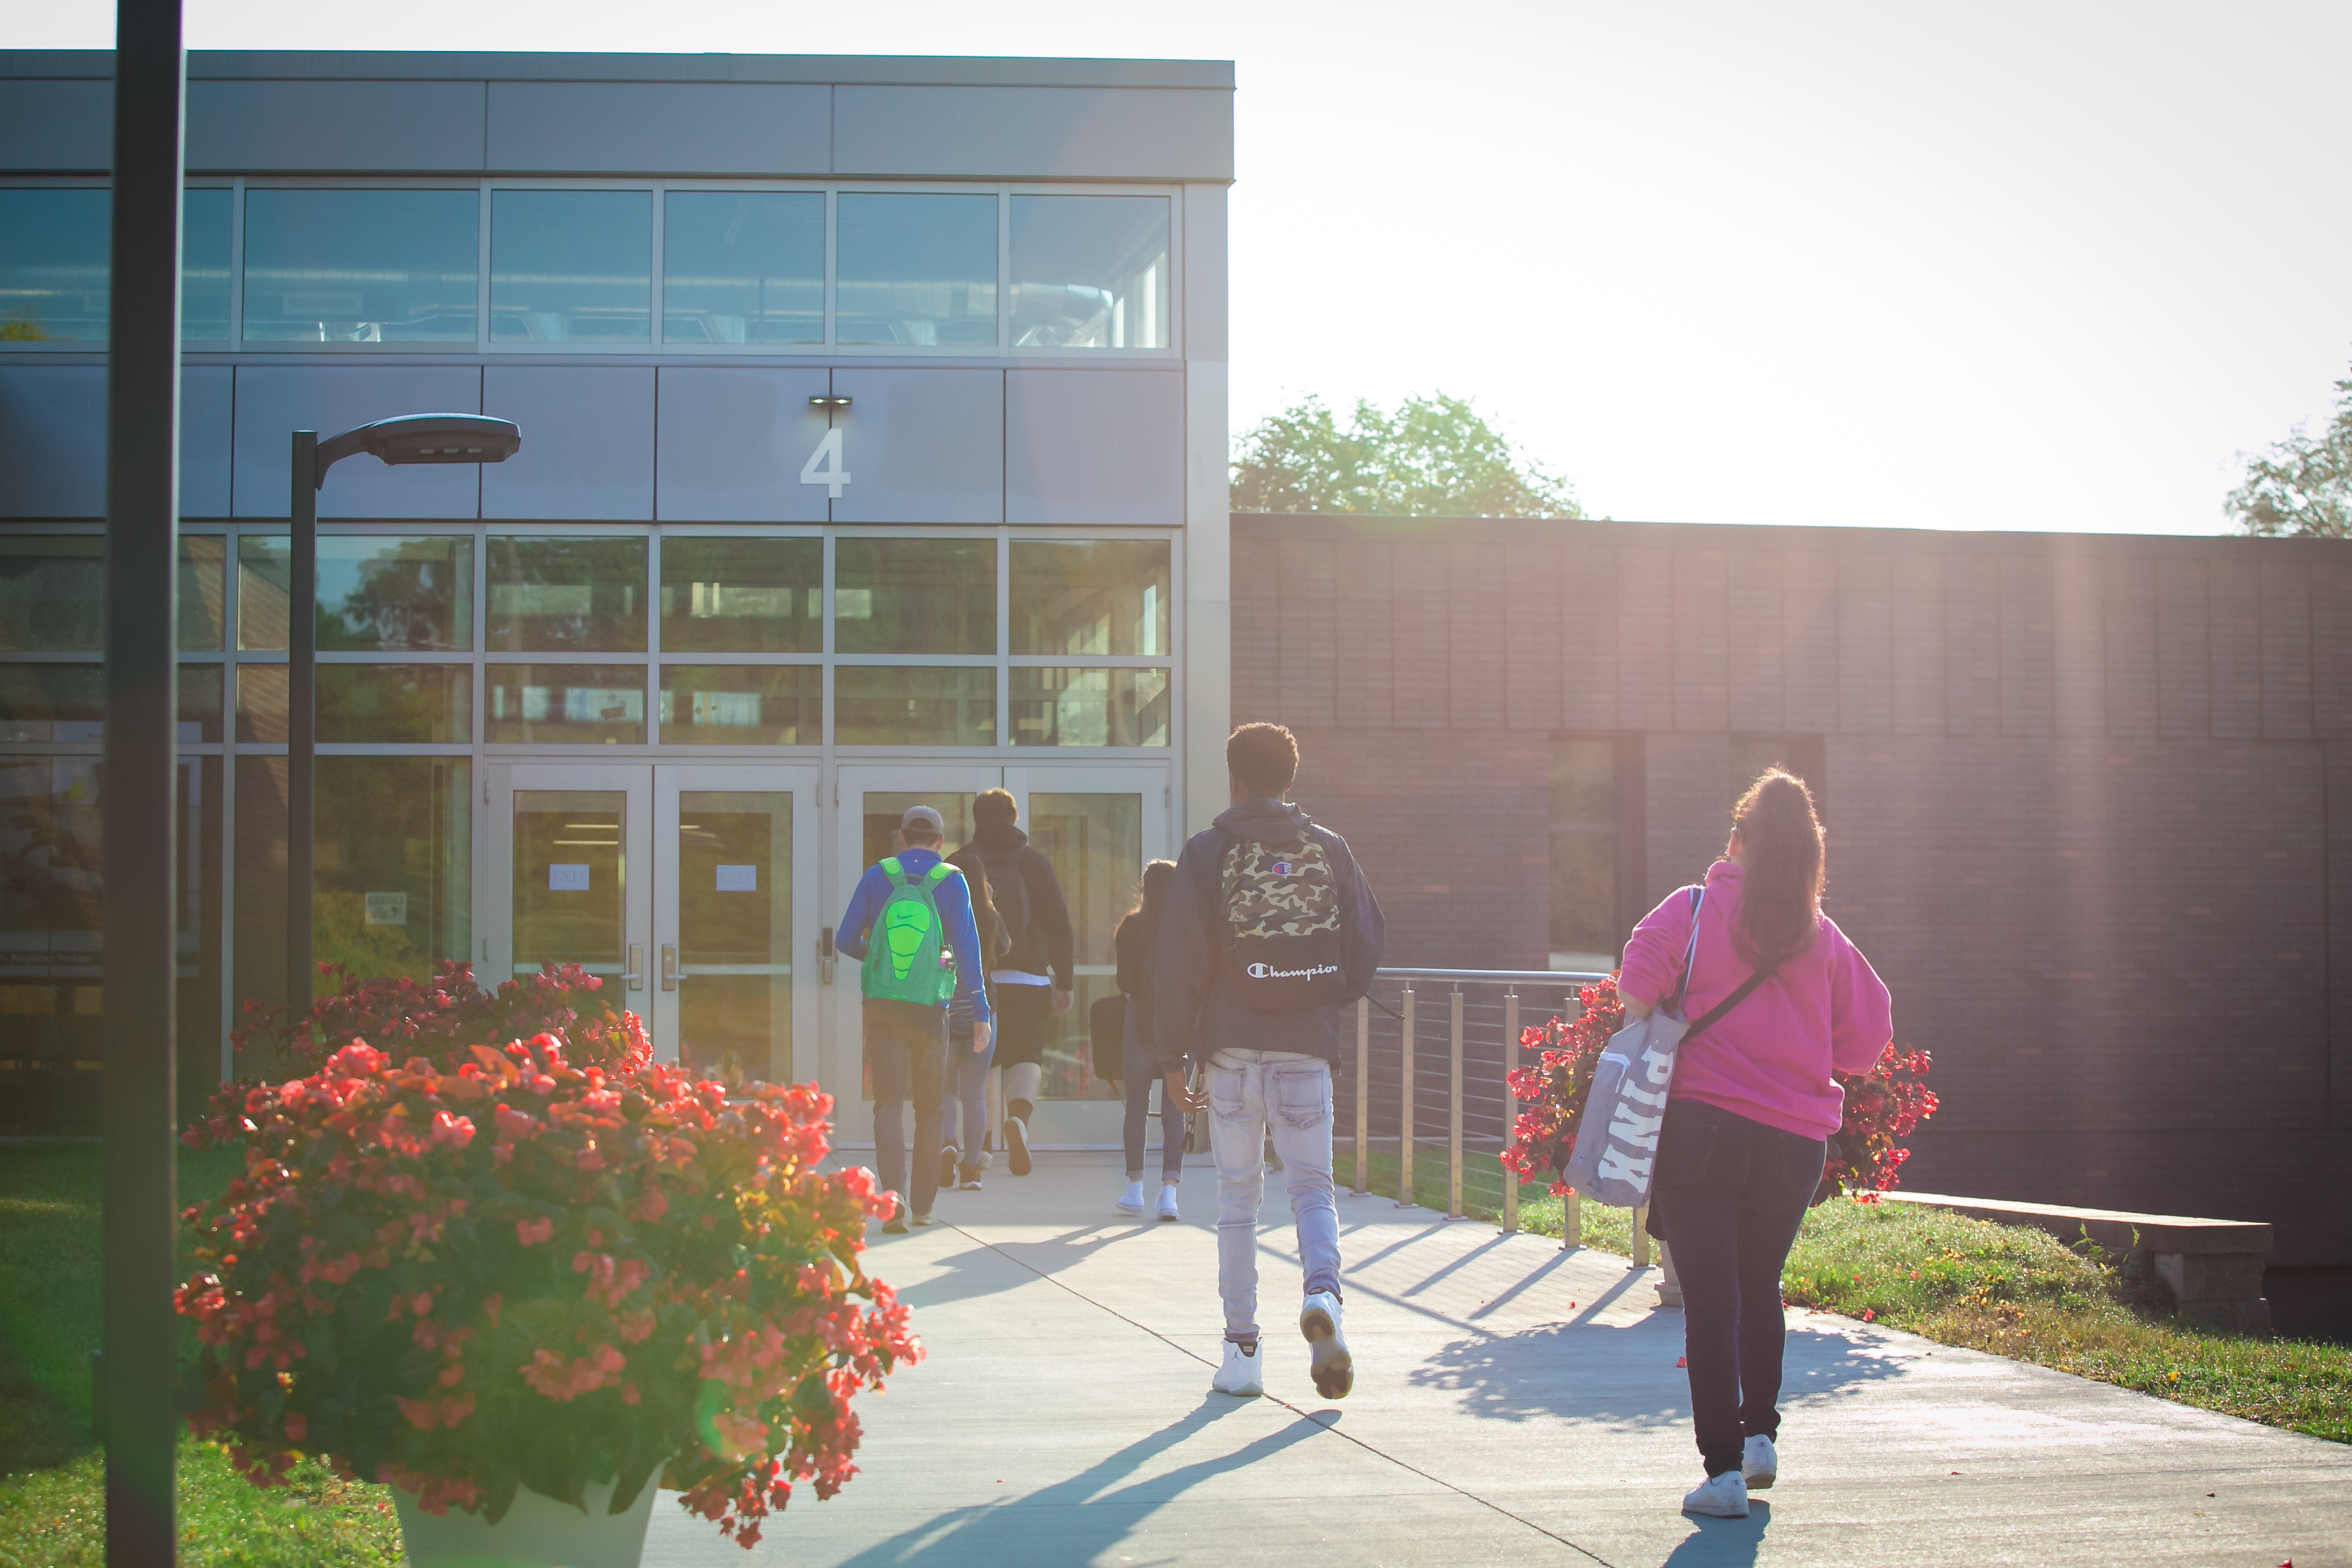 NWTC has been selected as one of the 150 institutions nationwide eligible to compete for the $1 million Aspen Prize for Community College Excellence